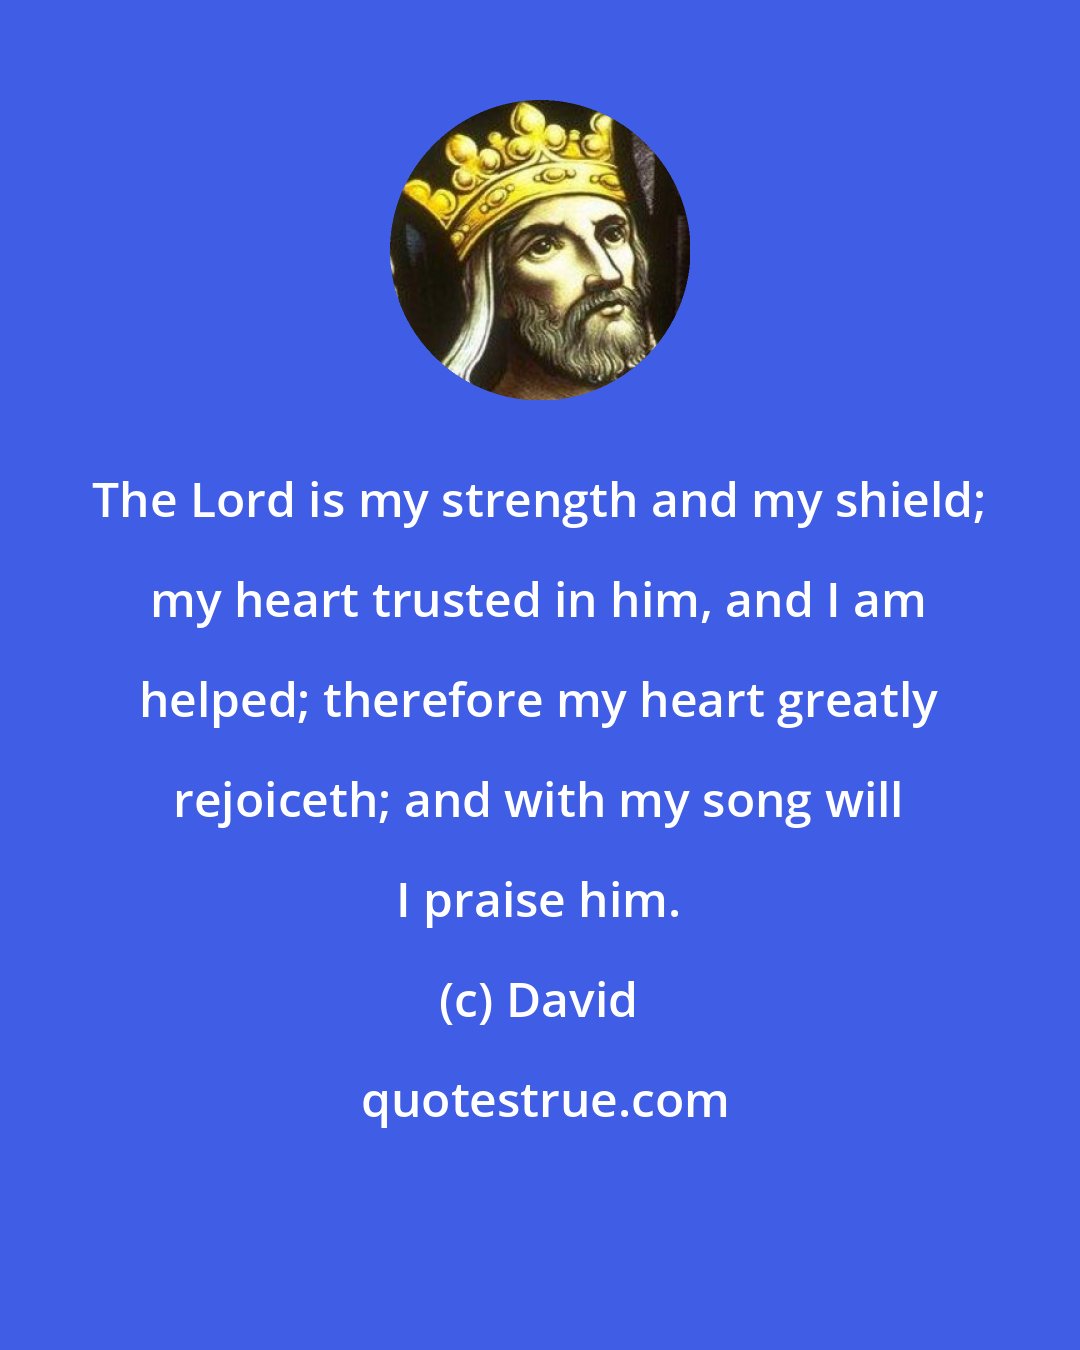 David: The Lord is my strength and my shield; my heart trusted in him, and I am helped; therefore my heart greatly rejoiceth; and with my song will I praise him.